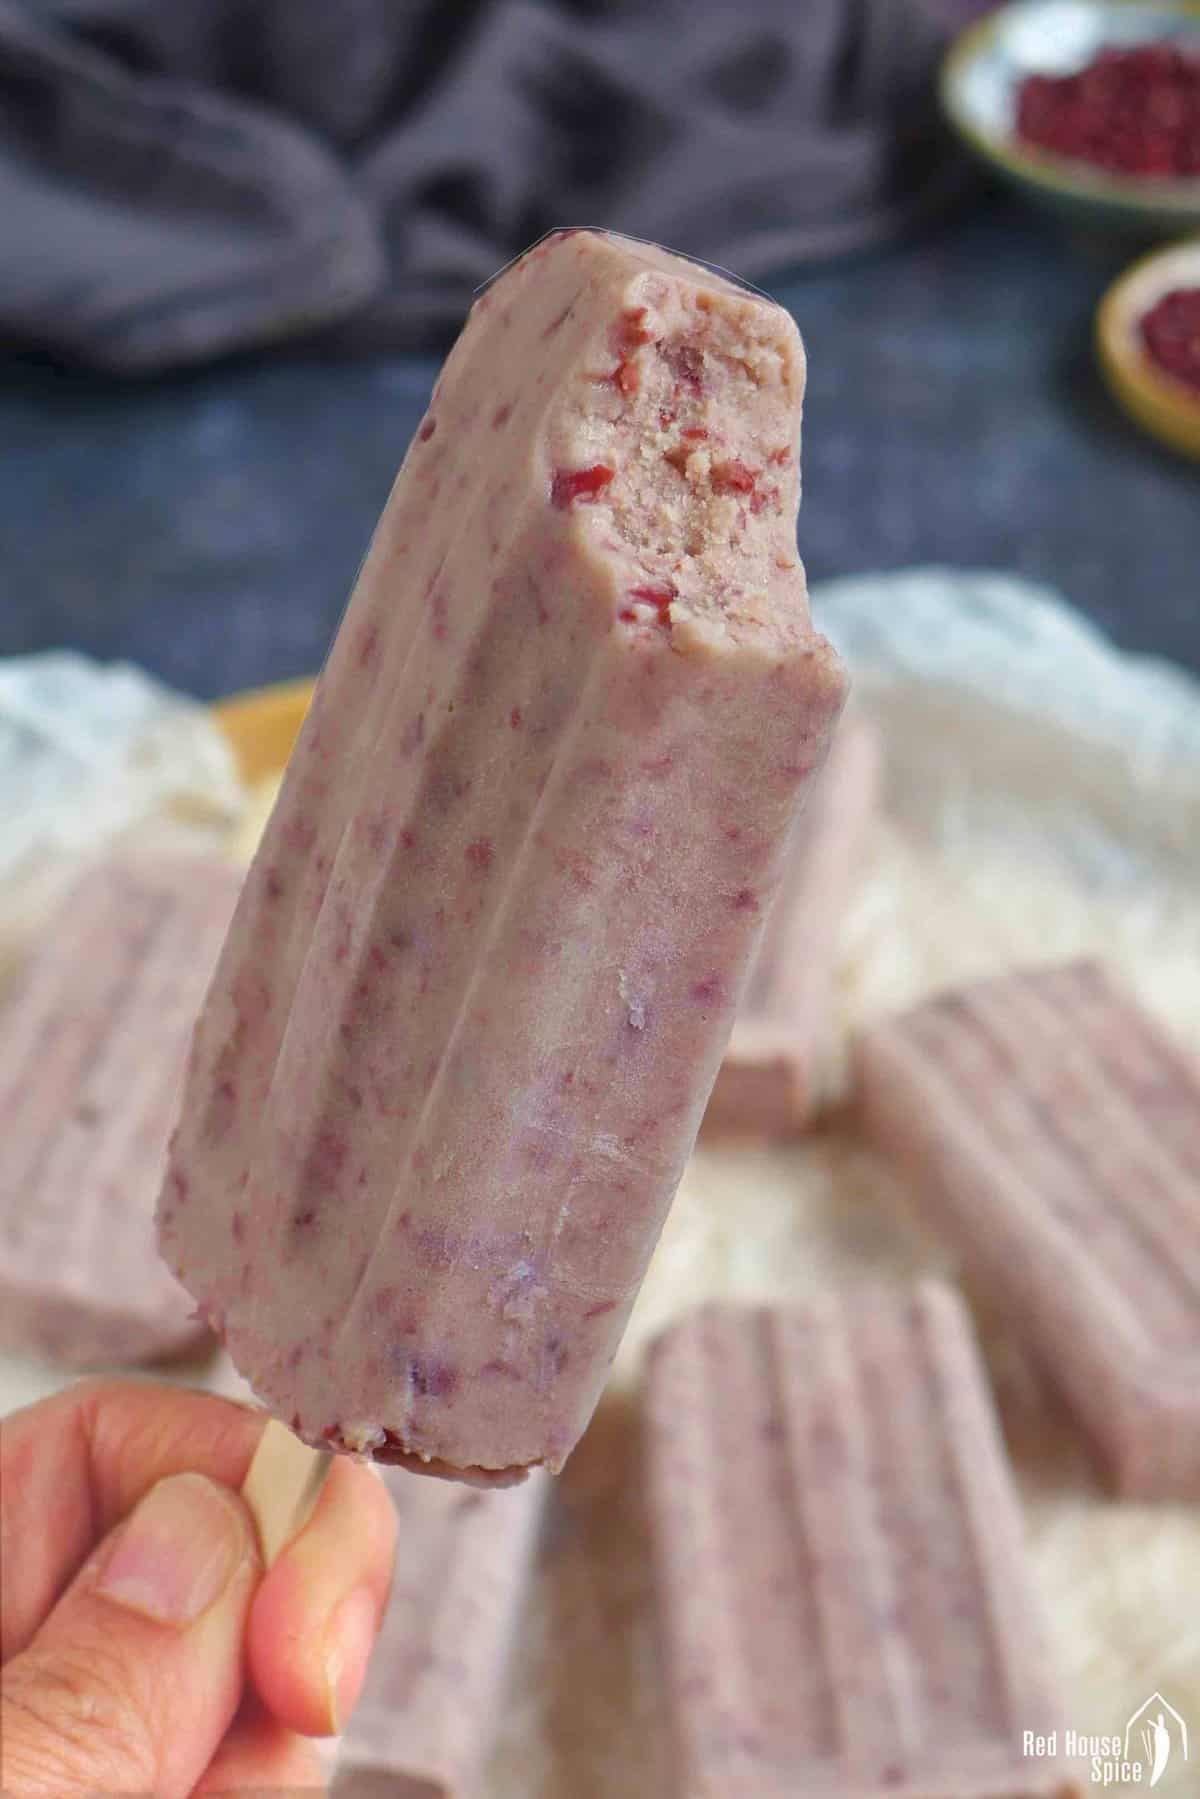 one red bean popsicle bitten on the top.